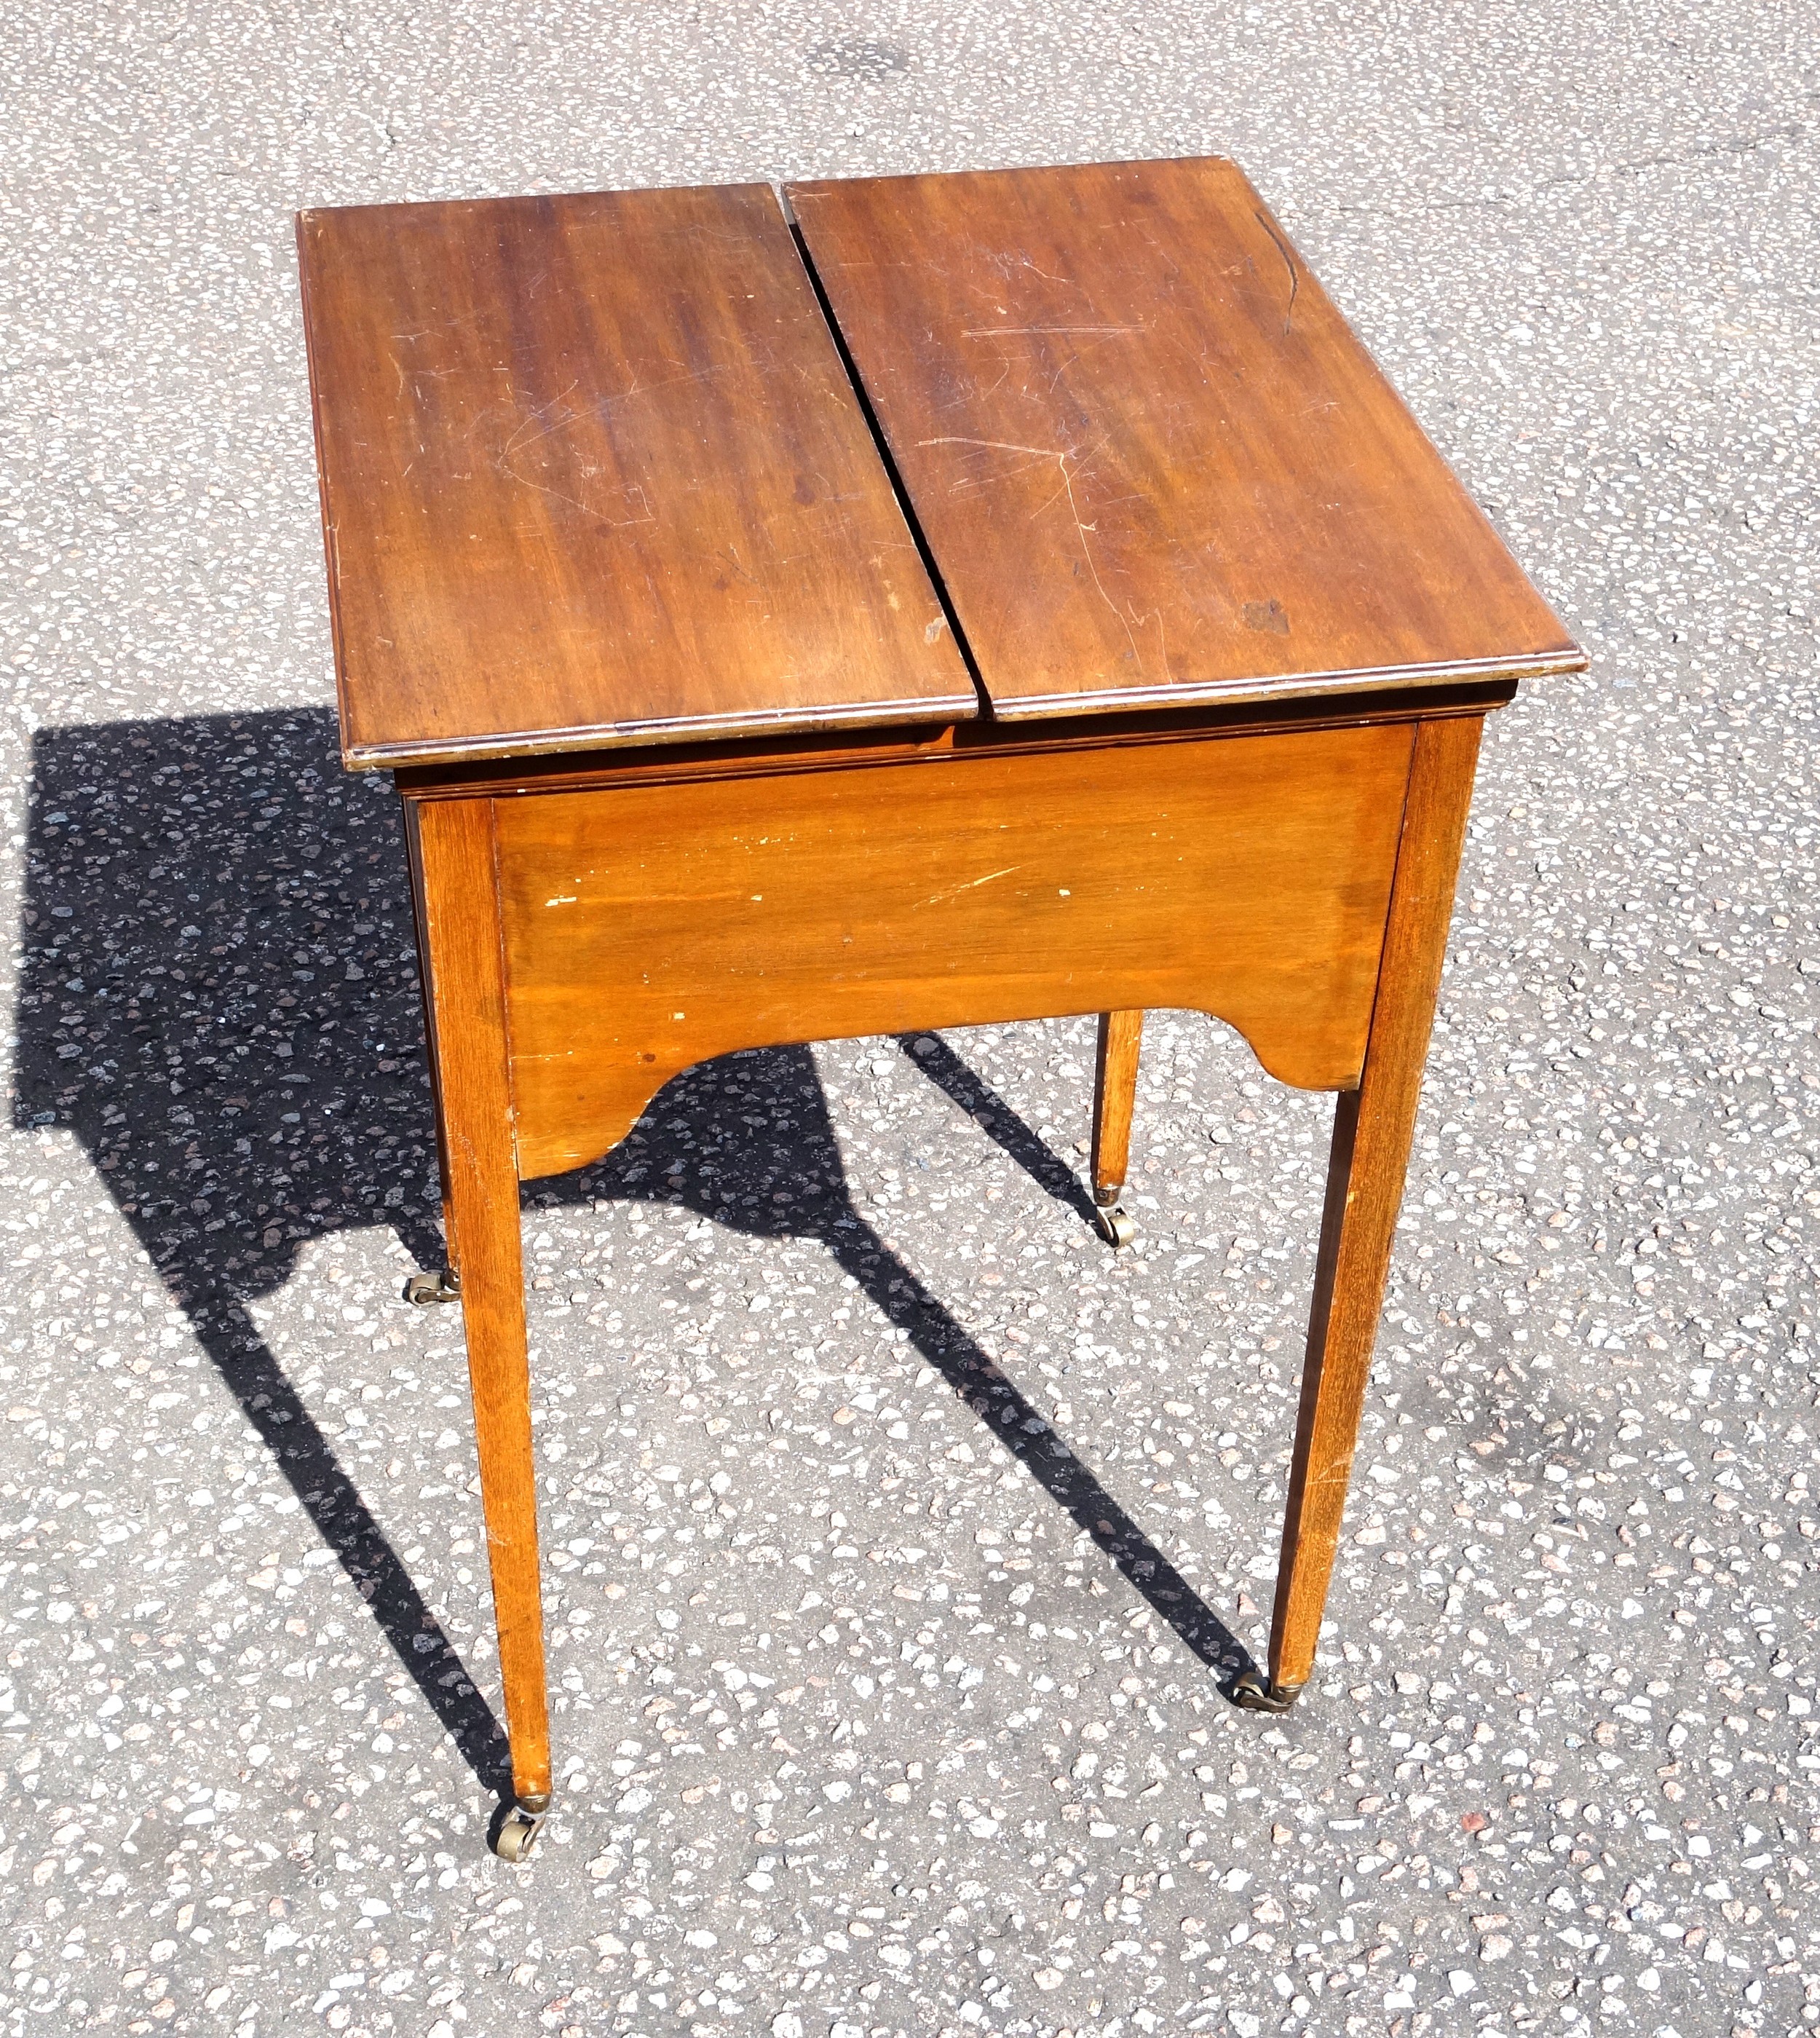 Edwardian Scottish mahogany writing table with a double hinged top raising a slope with pen tray, - Image 4 of 7